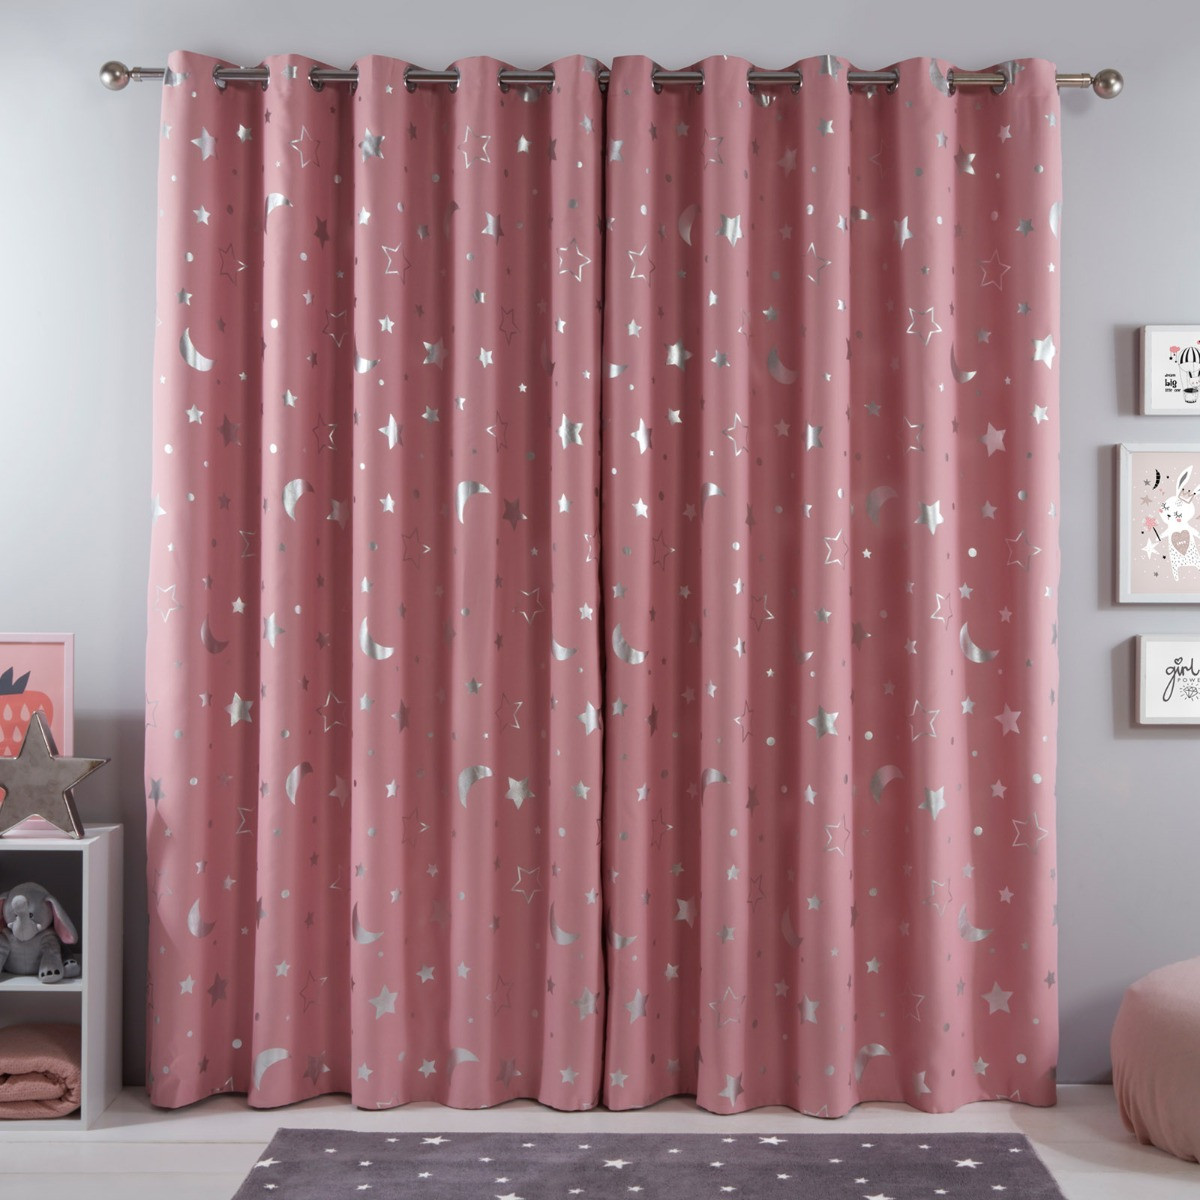 Dreamscene by OHS Star Galaxy Blackout Curtains Grommet Top - Blush Pink>